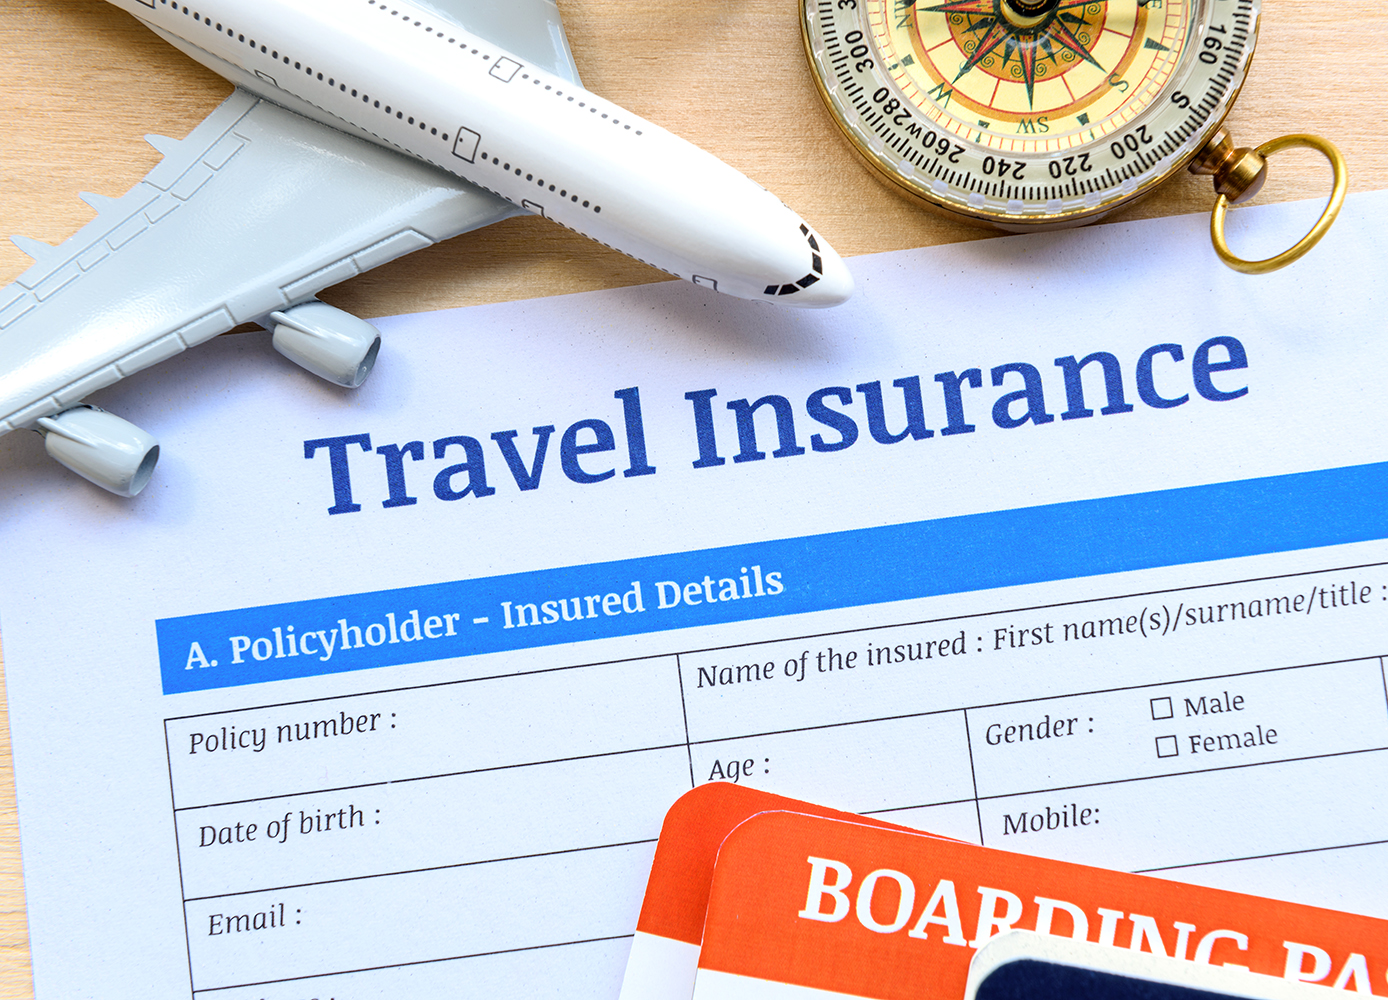 manulife travel insurance cancellation